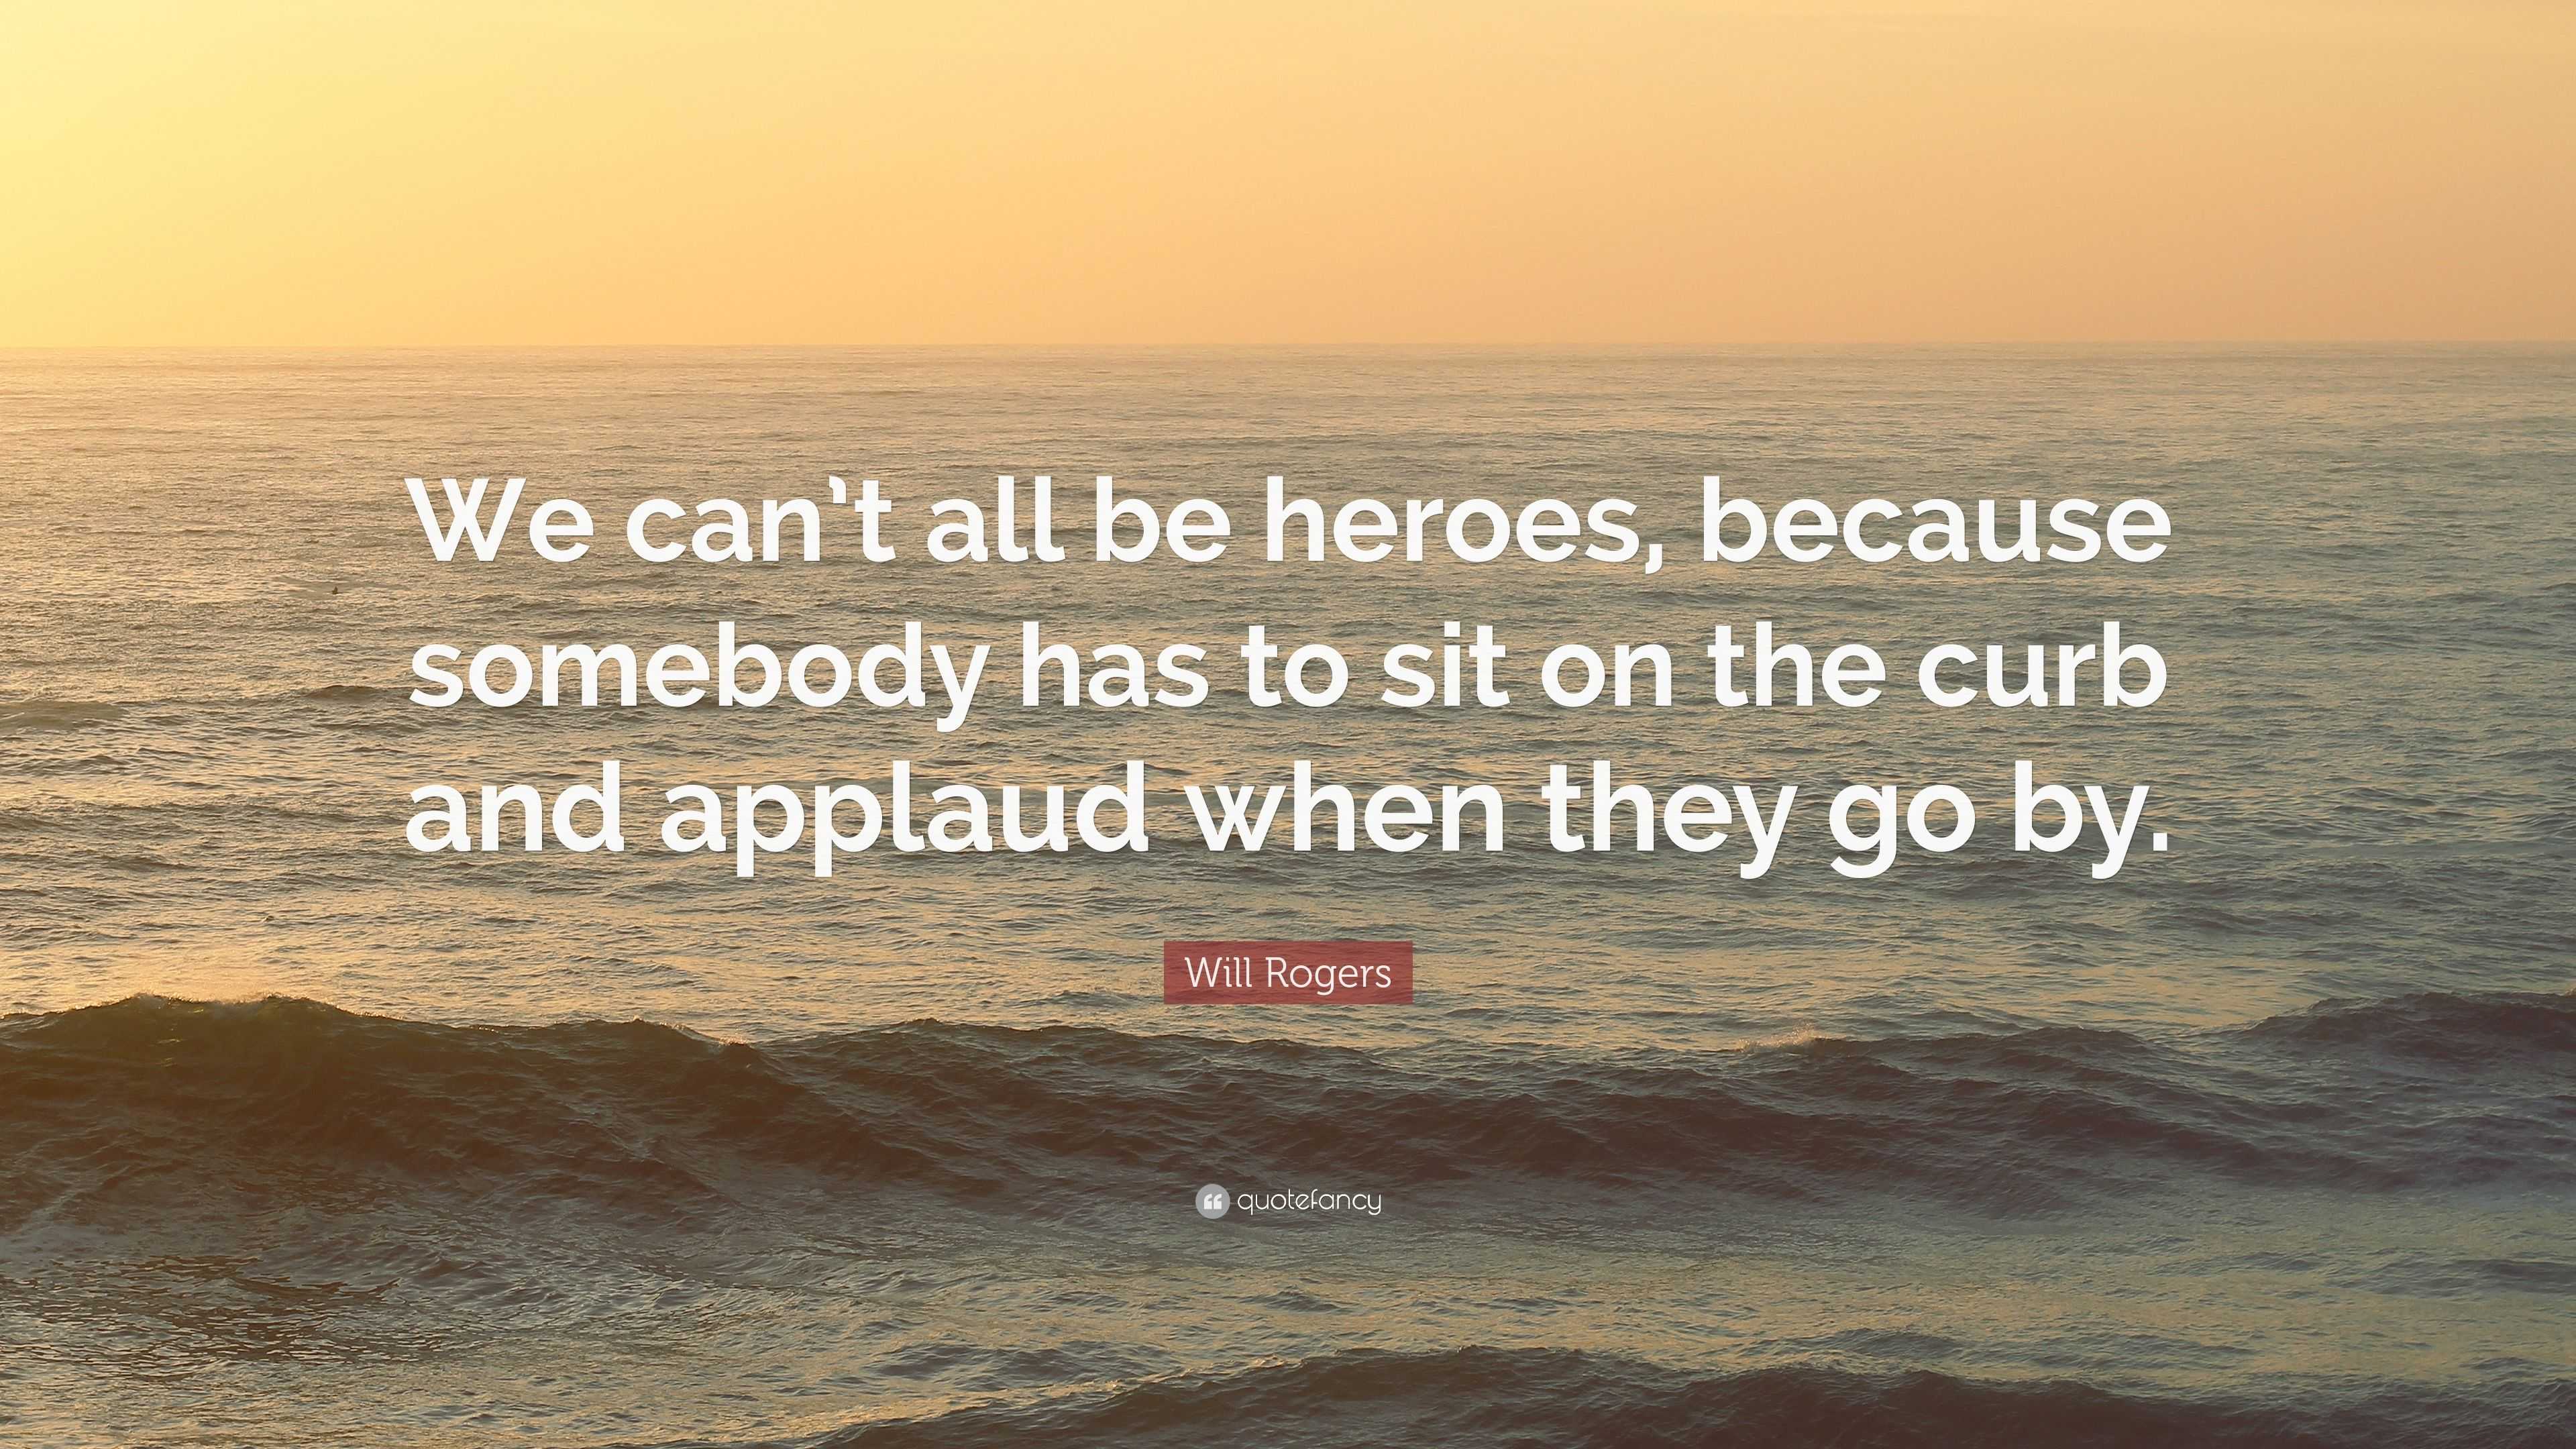 company of heroes quote